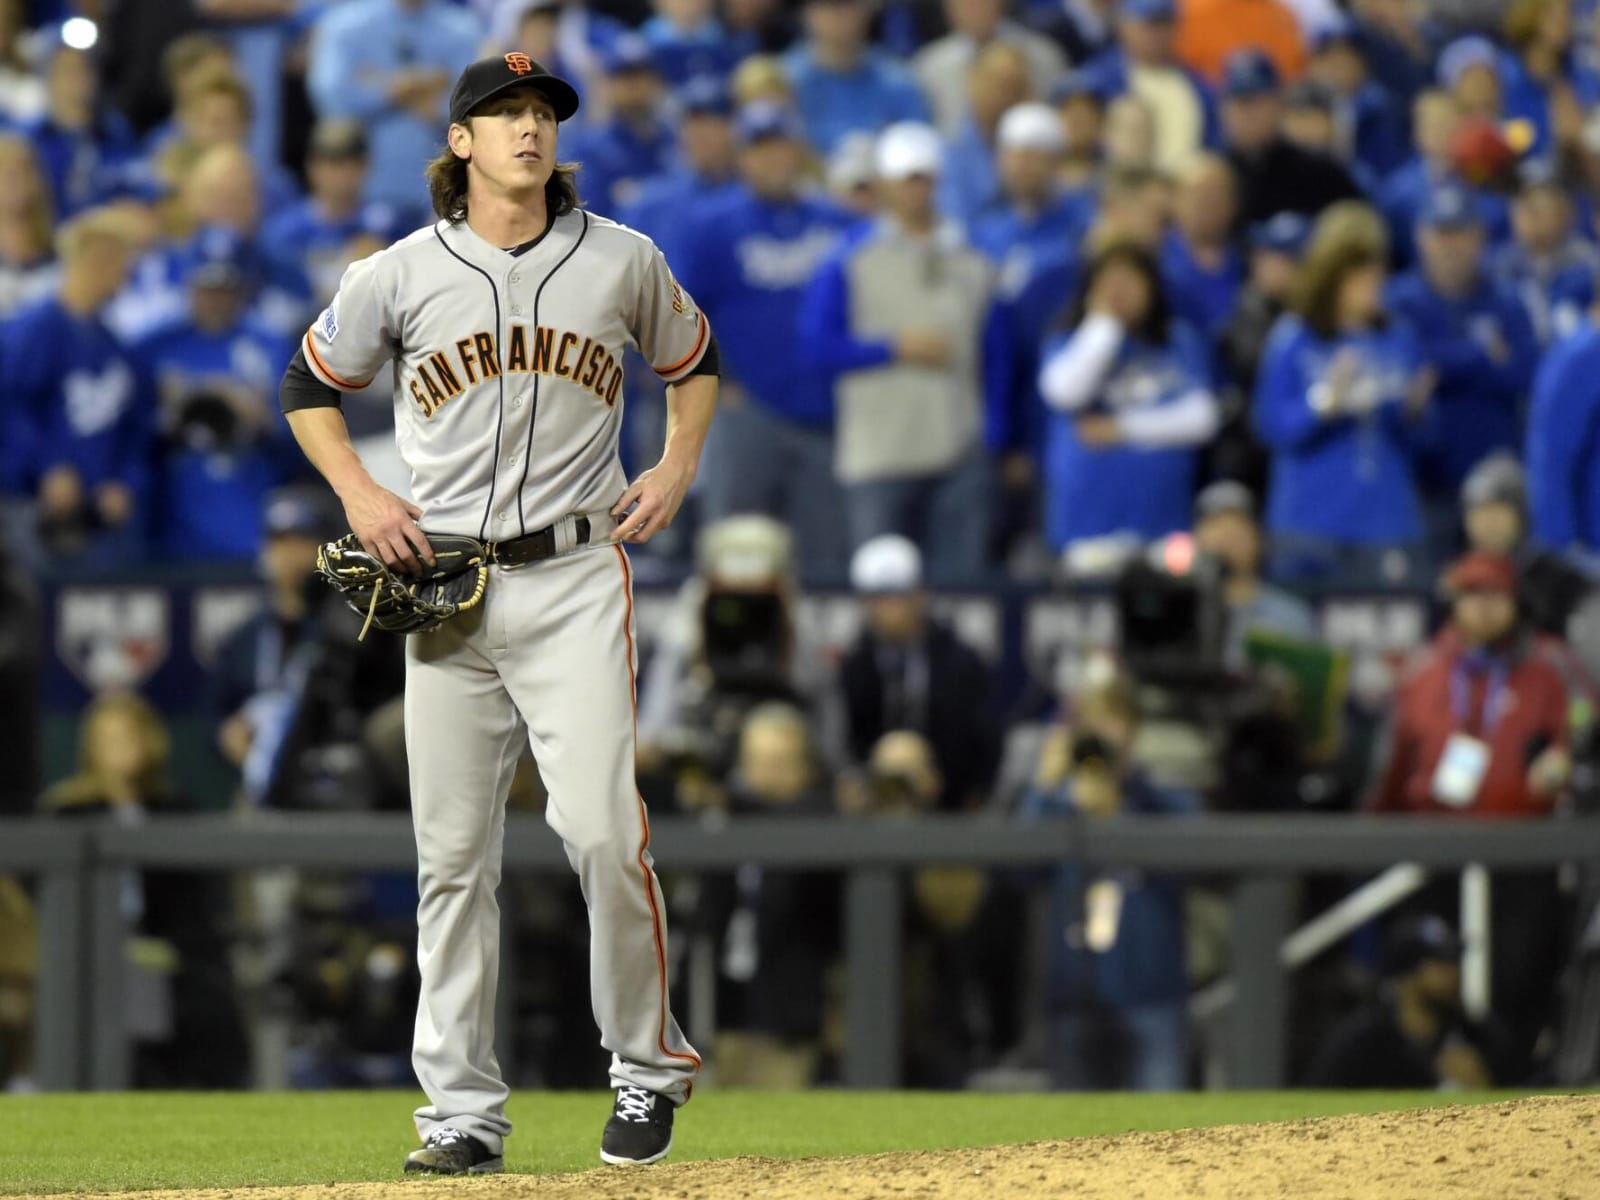 Former San Francisco Giants pitcher Tim Lincecum's wife dies at age 38